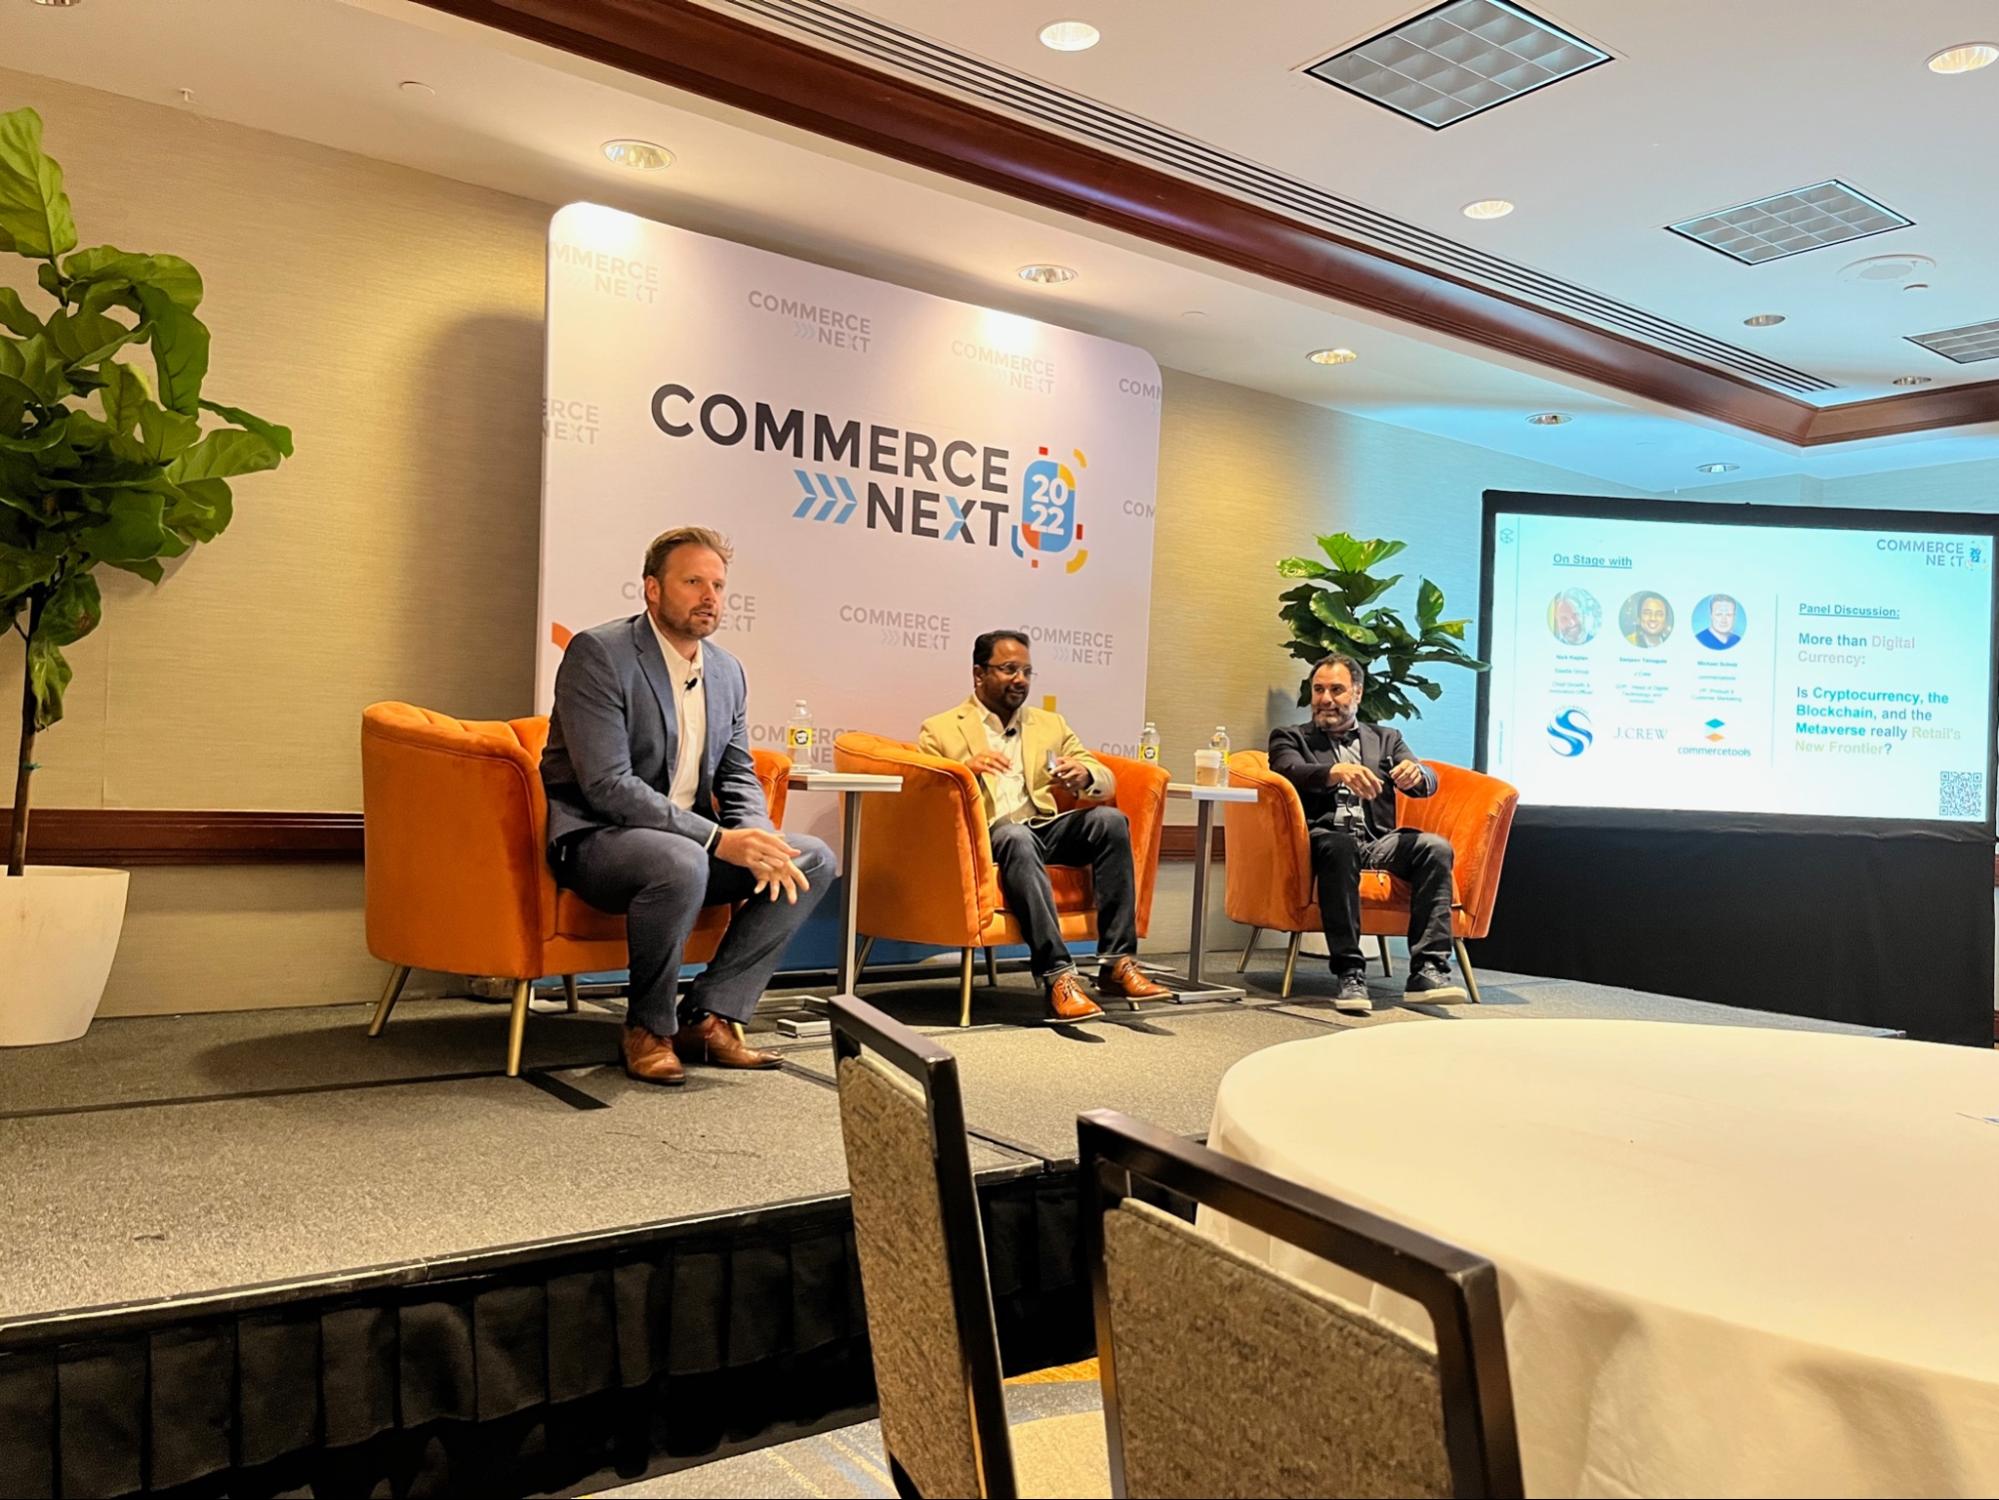 session about how relevant are the metaverse, blockchain and cryptocurrencies at commercenext